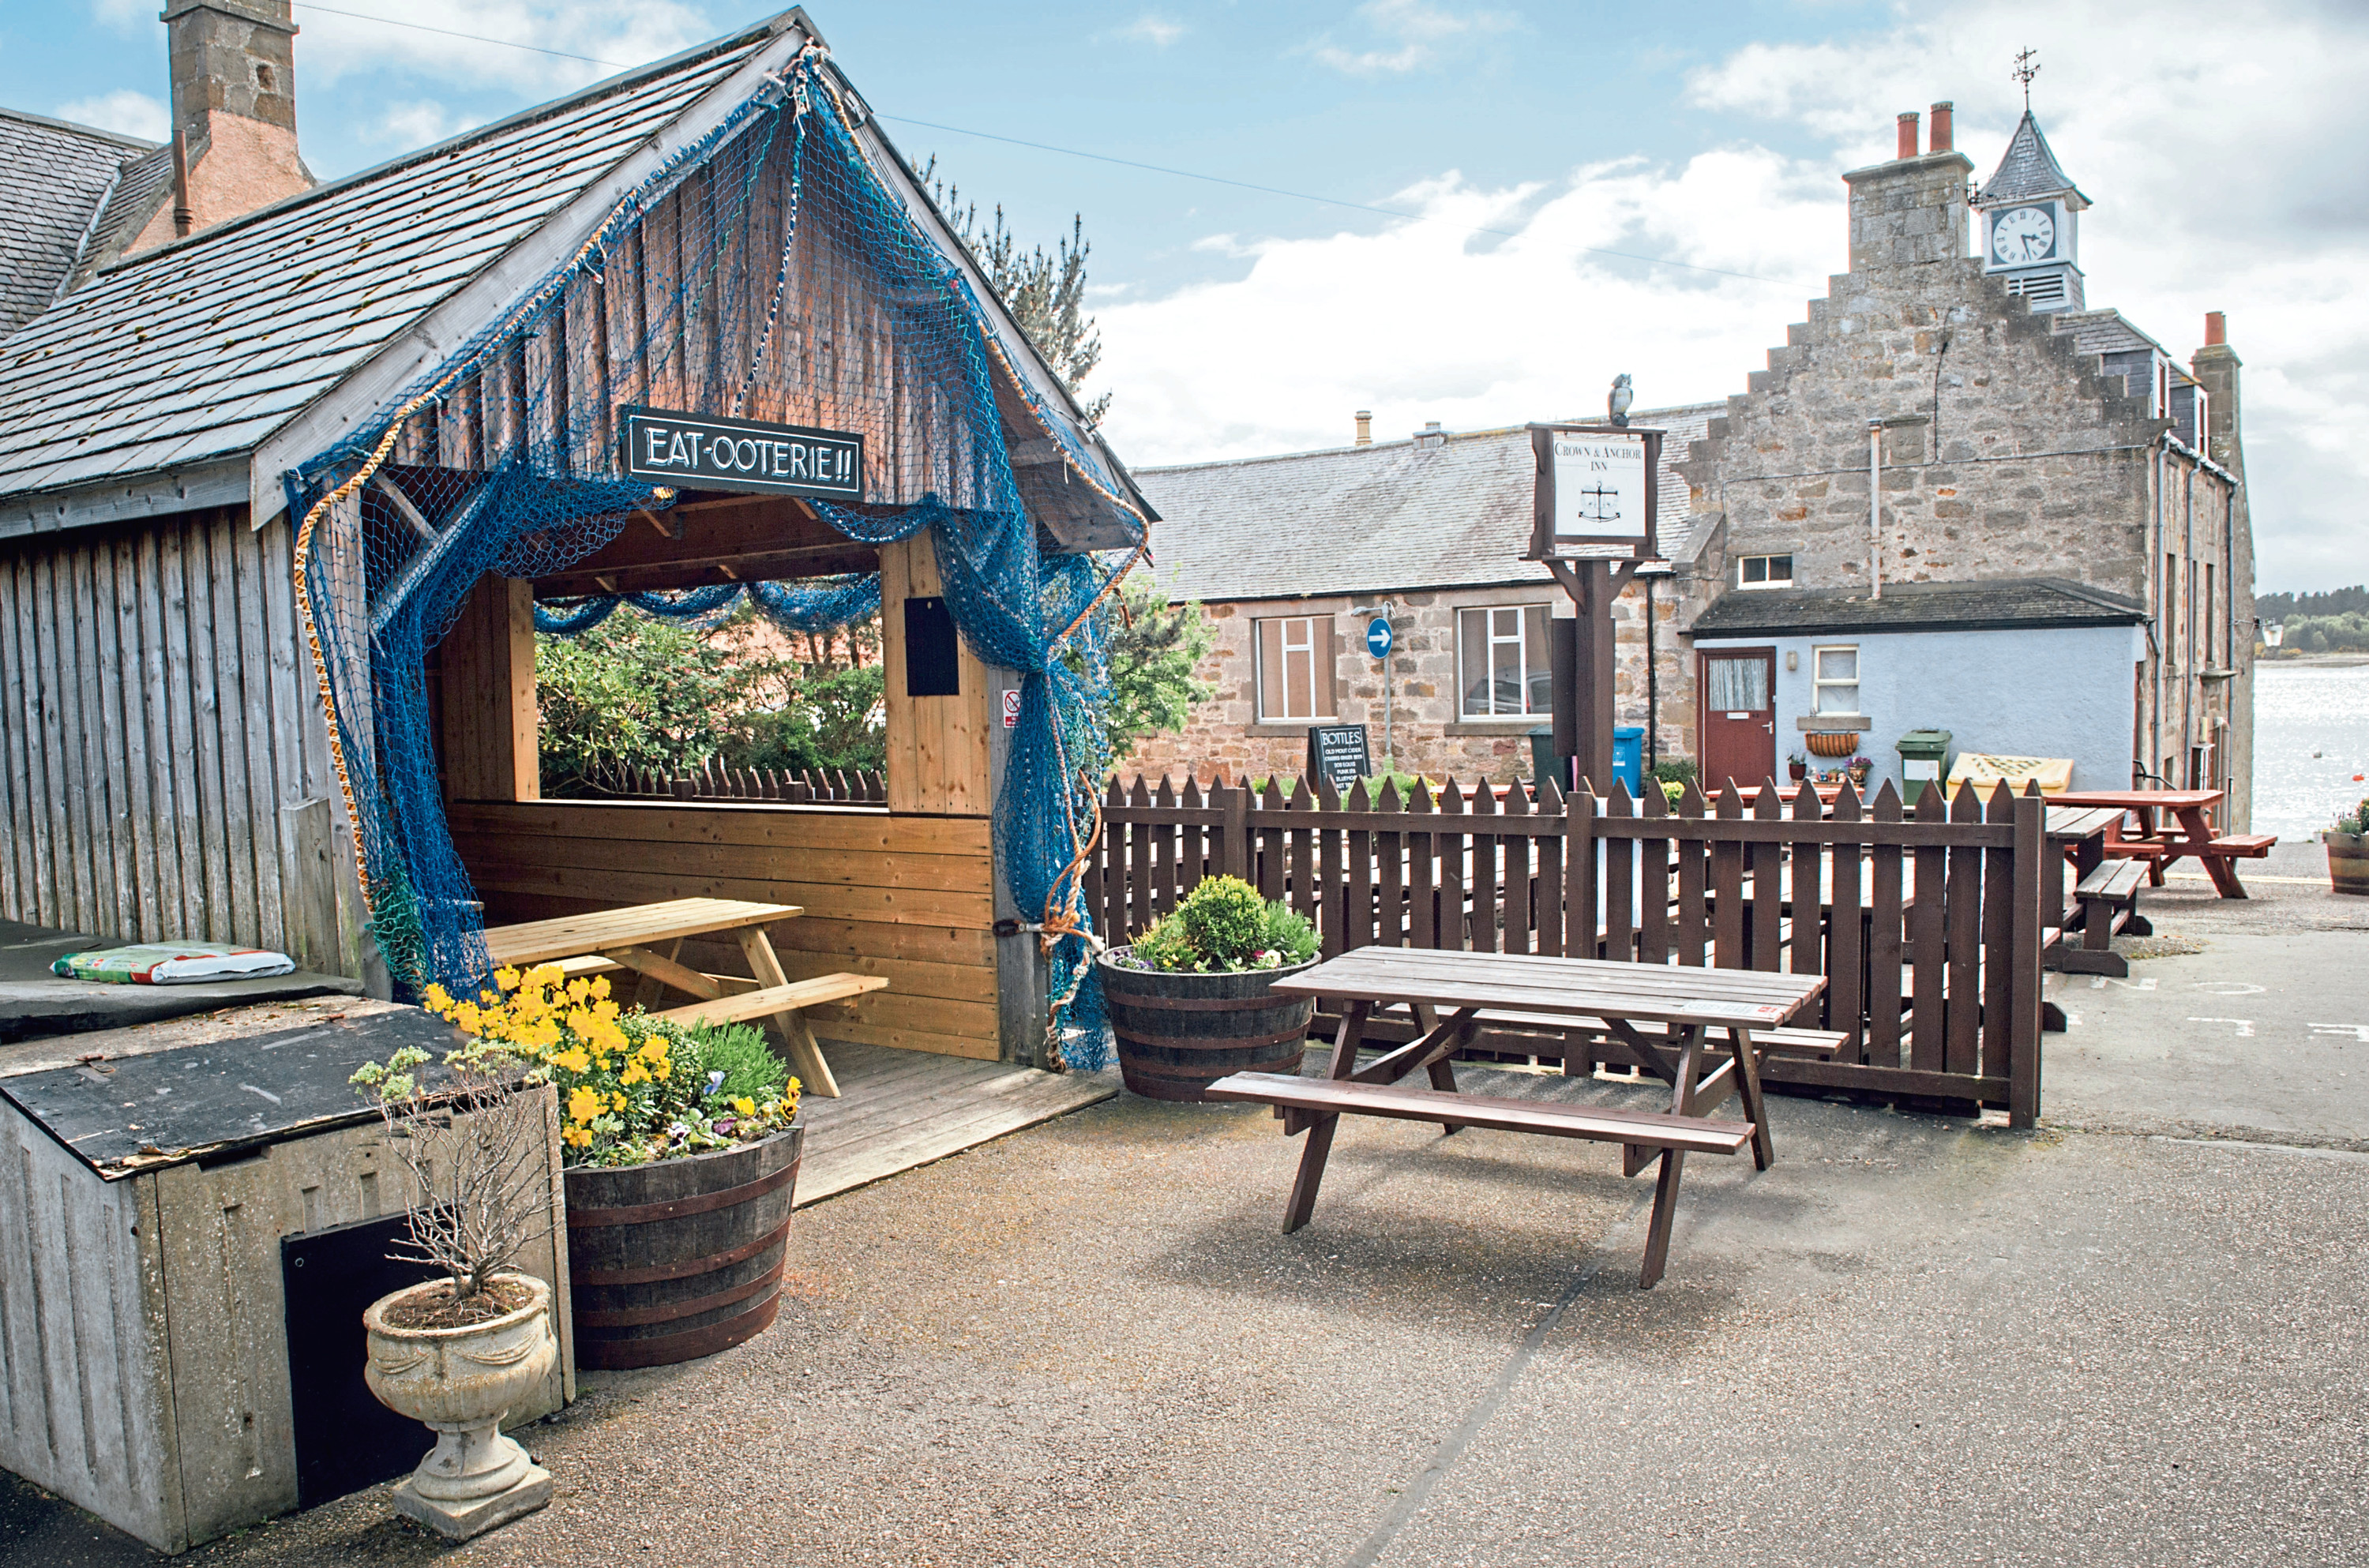 The Crown & Anchor Inn in Findhorn, Moray.

Pictures by Jason Hedges